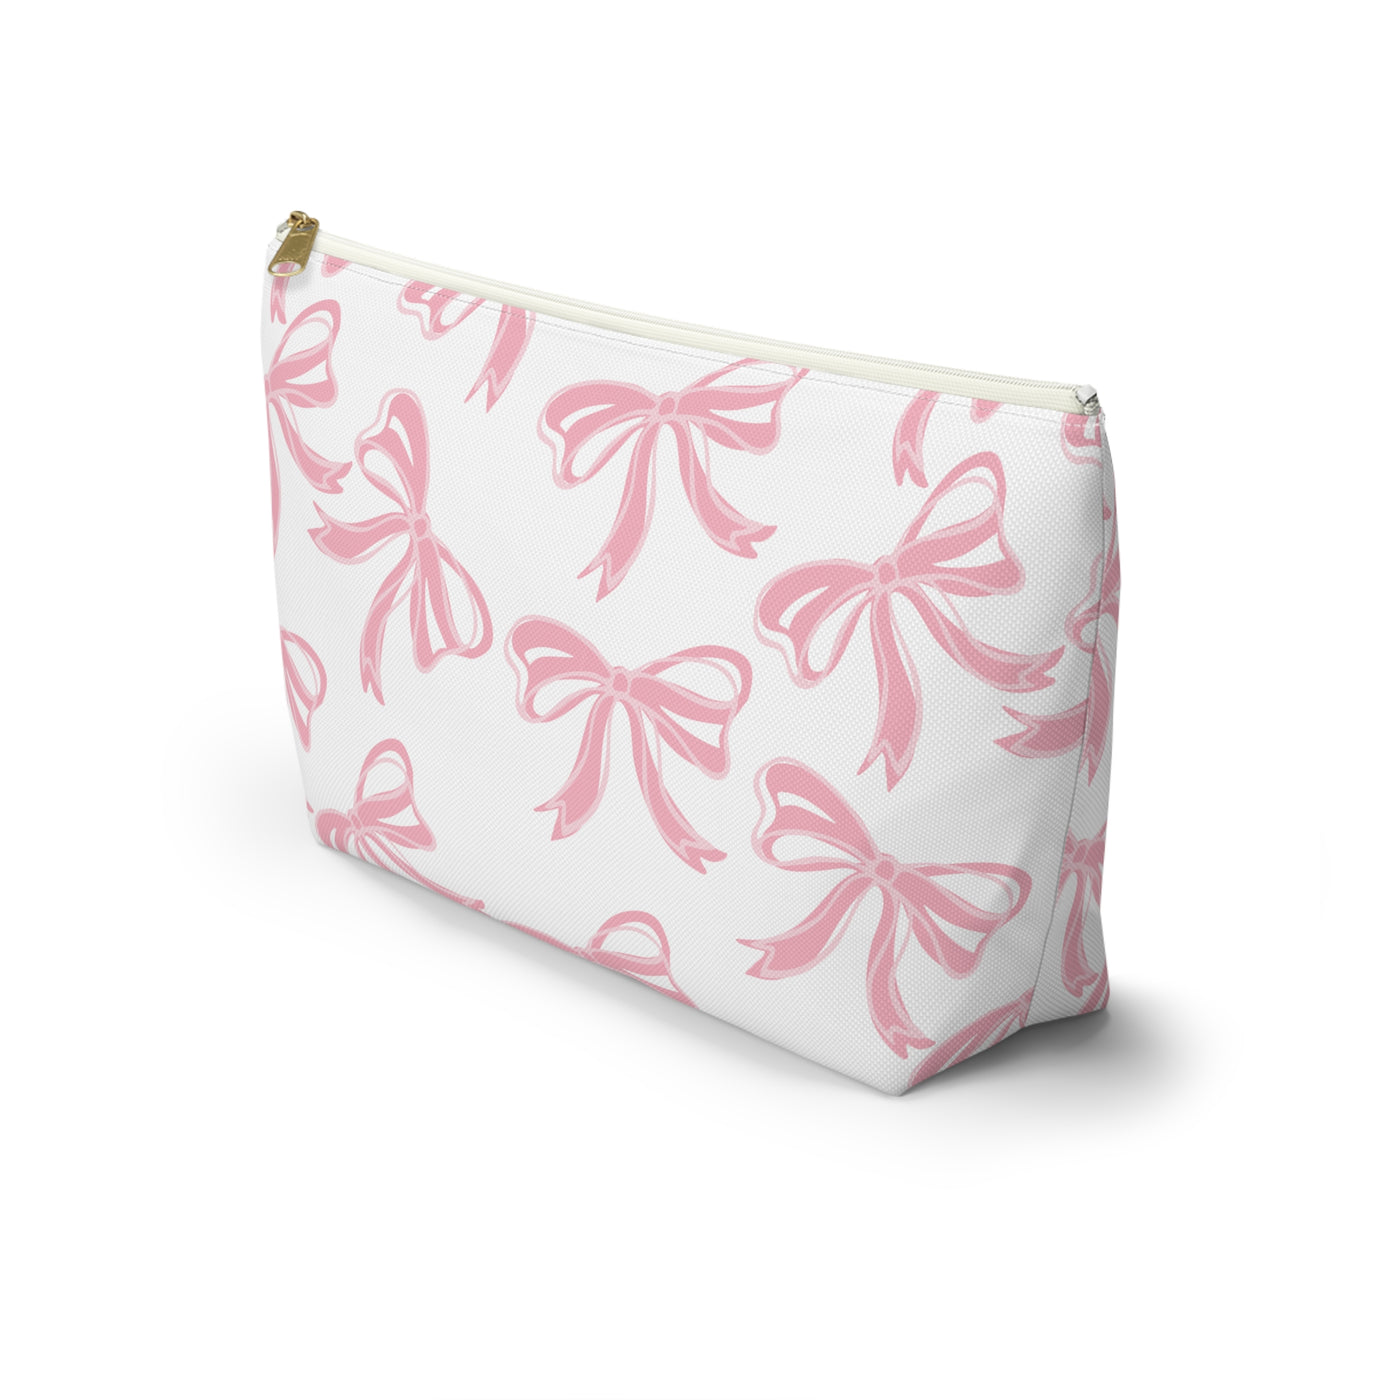 Coquette Pink Bow Monogram Makeup Bag,  Blue French Toile Makeup Bag, Coquette Accessories, Pink Accessories, Pink Coquette Makeup Bag